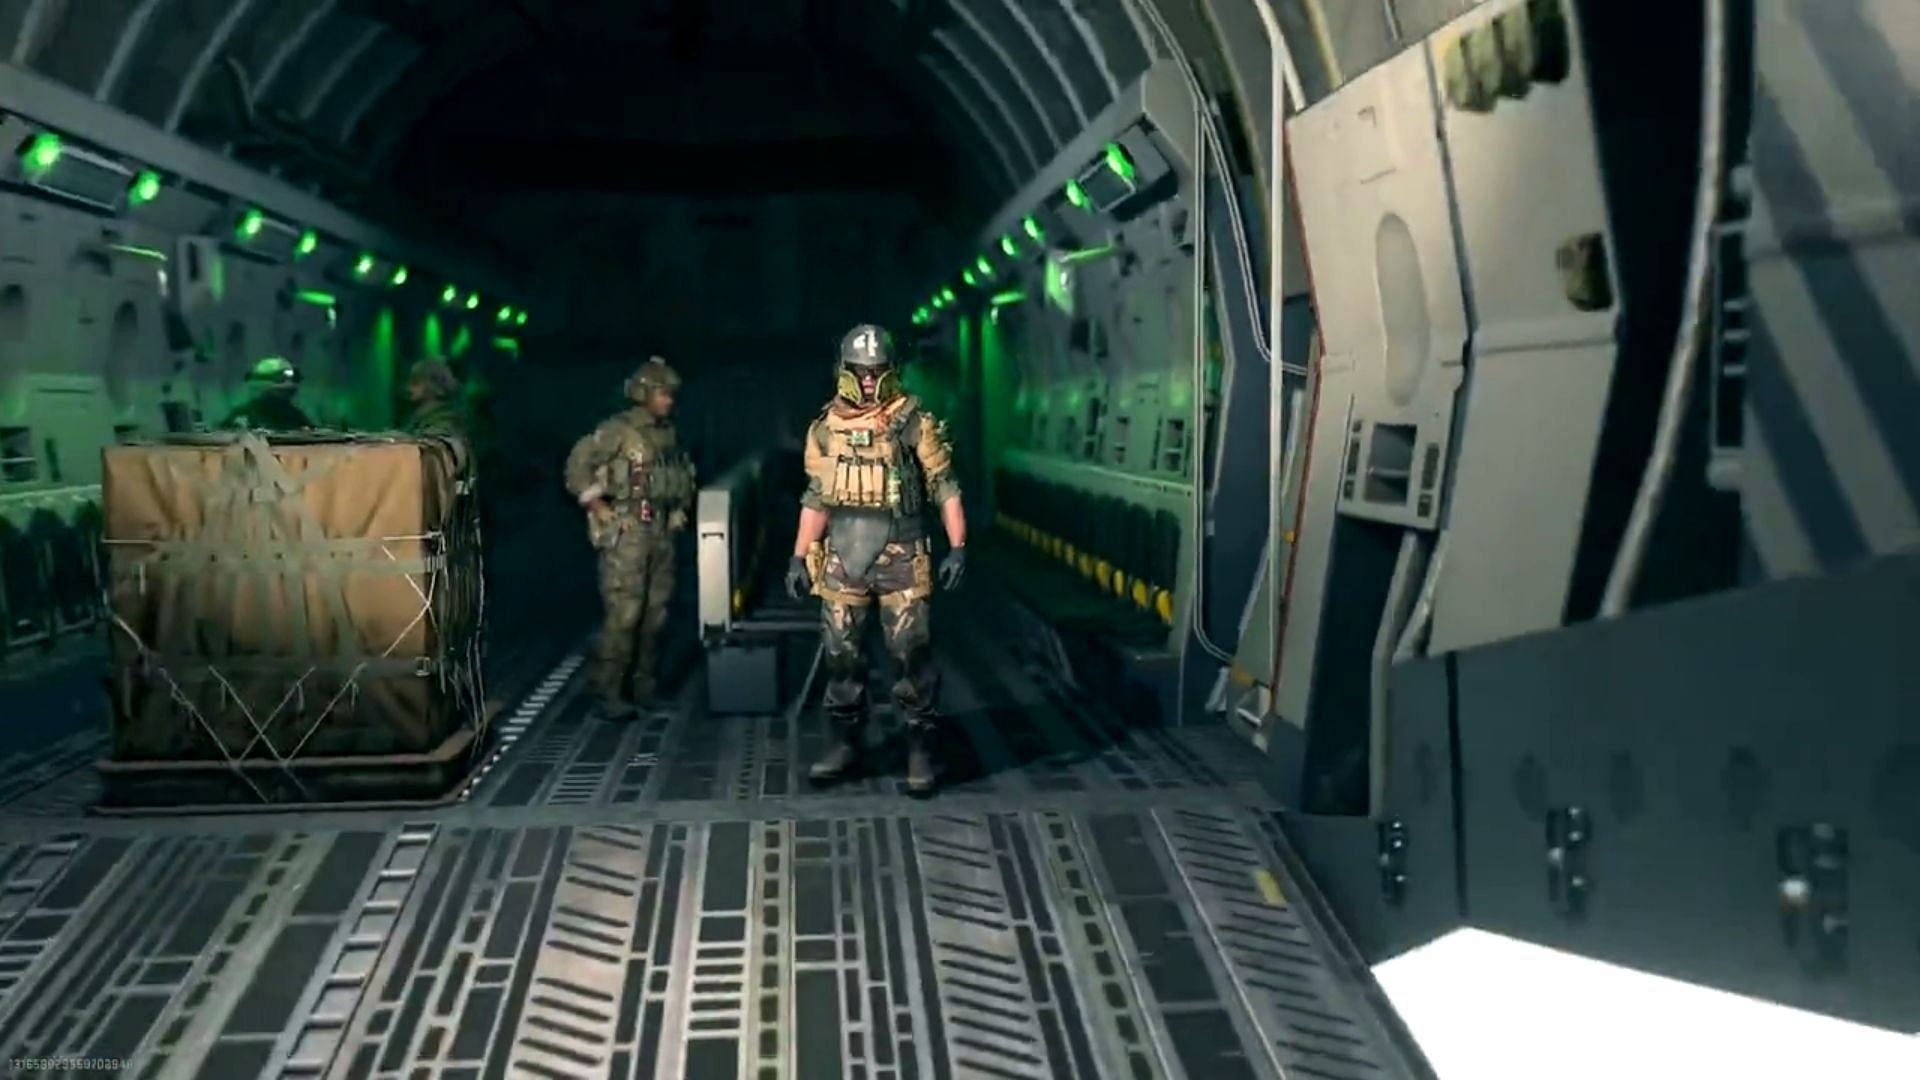 Players deploying from the plane in Warzone 2 cinematic intro (image via Twitter/CODSploitsImgz)